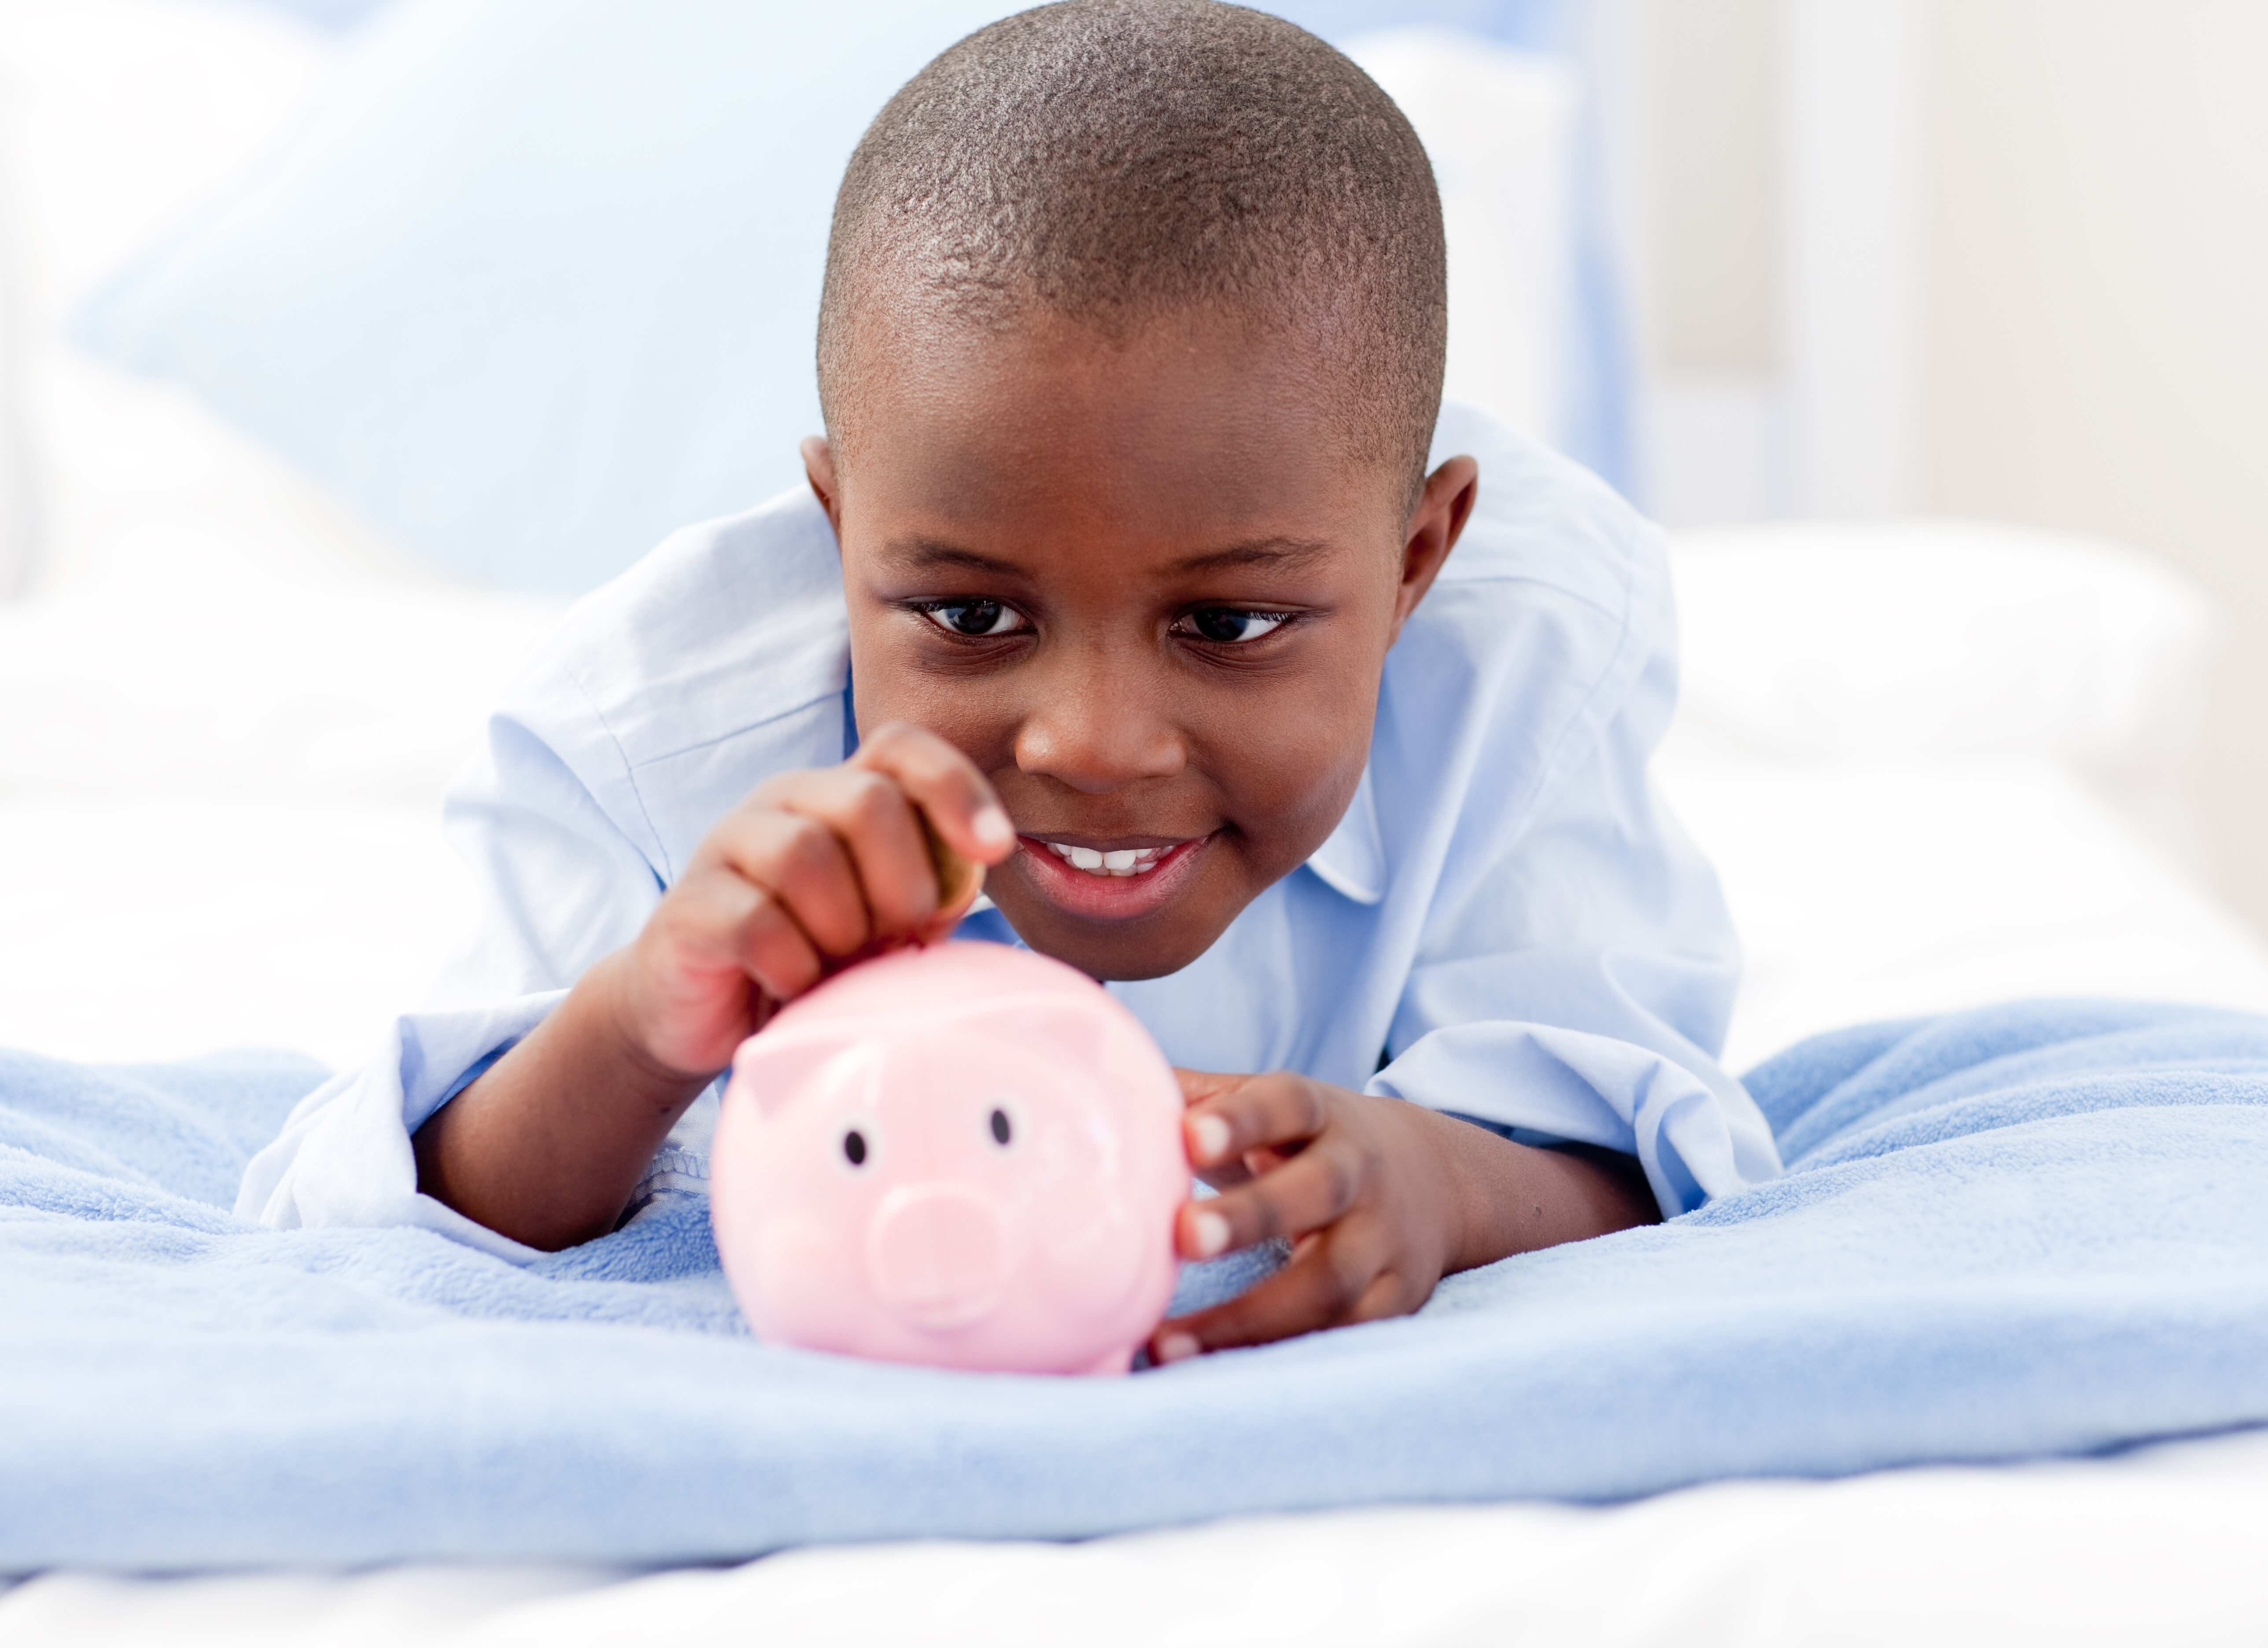 What We Are Teaching Our Kids About Money